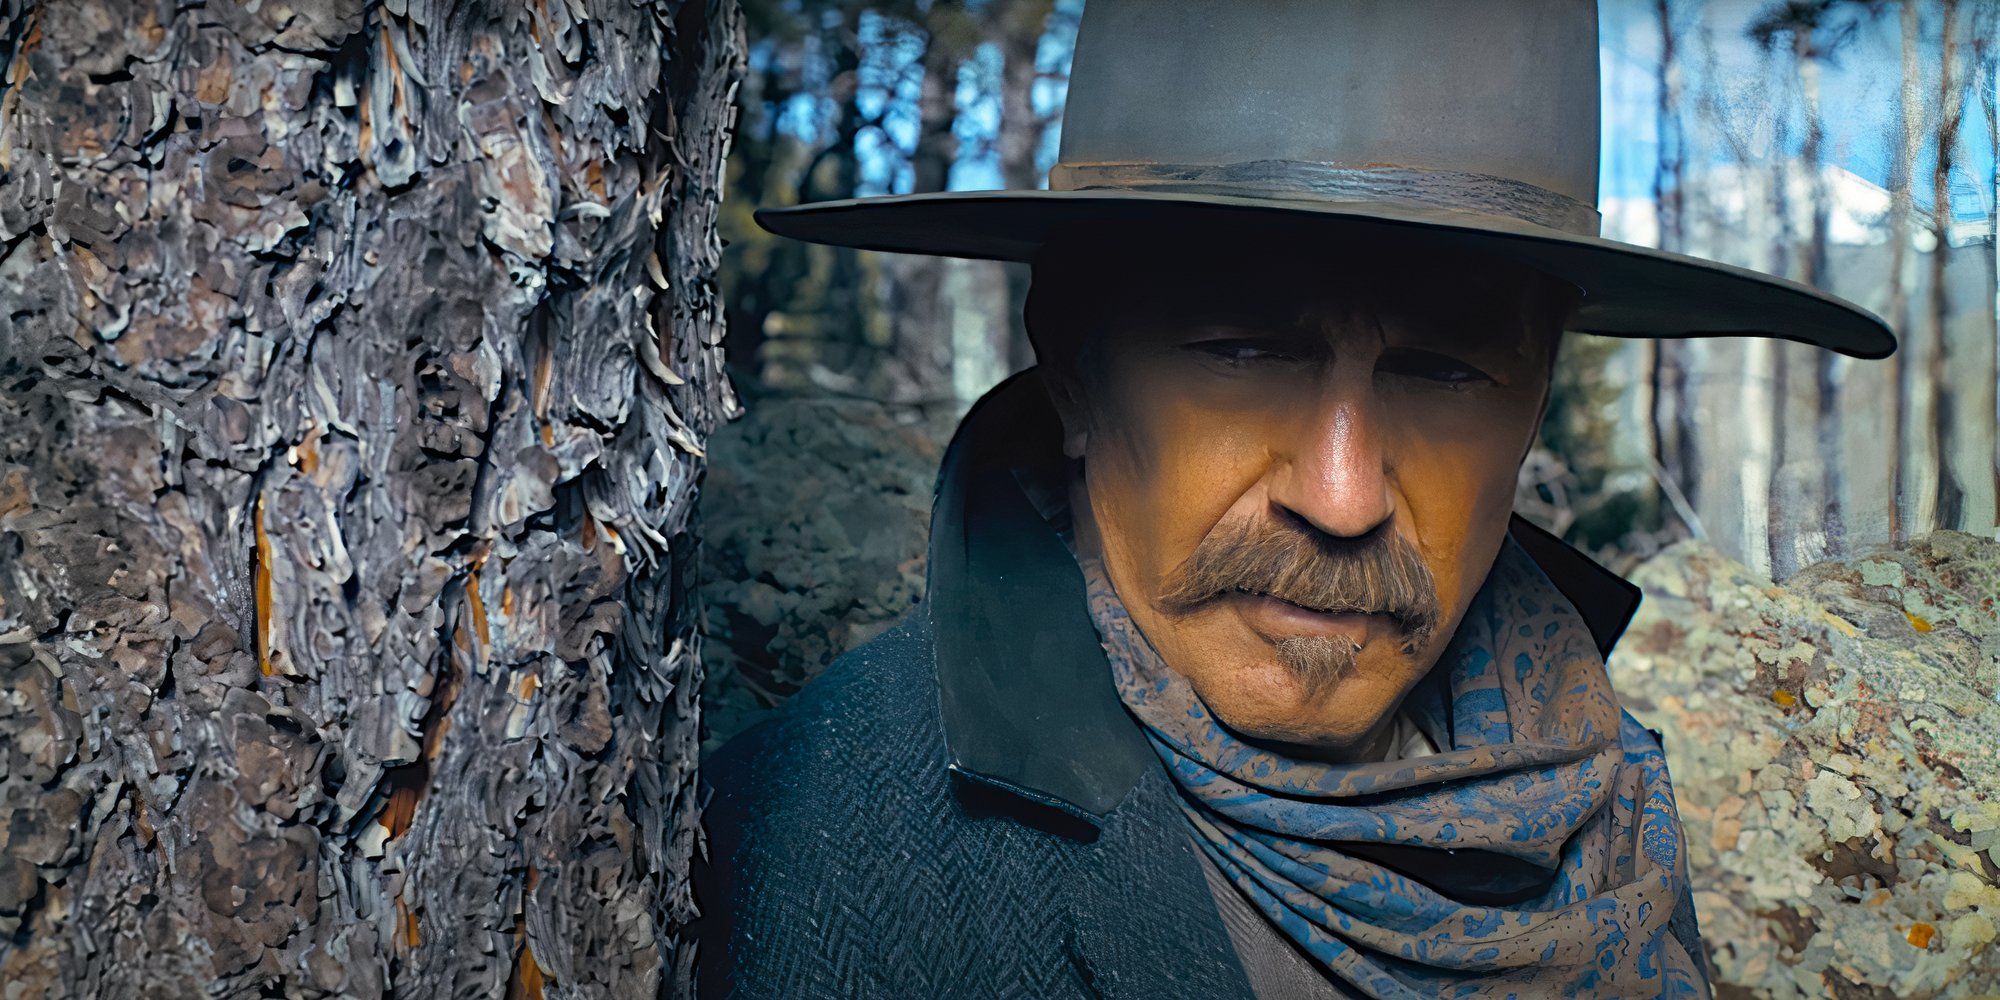 Kevin Costner peers from behind a tree in a scene from Horizon: An American Saga